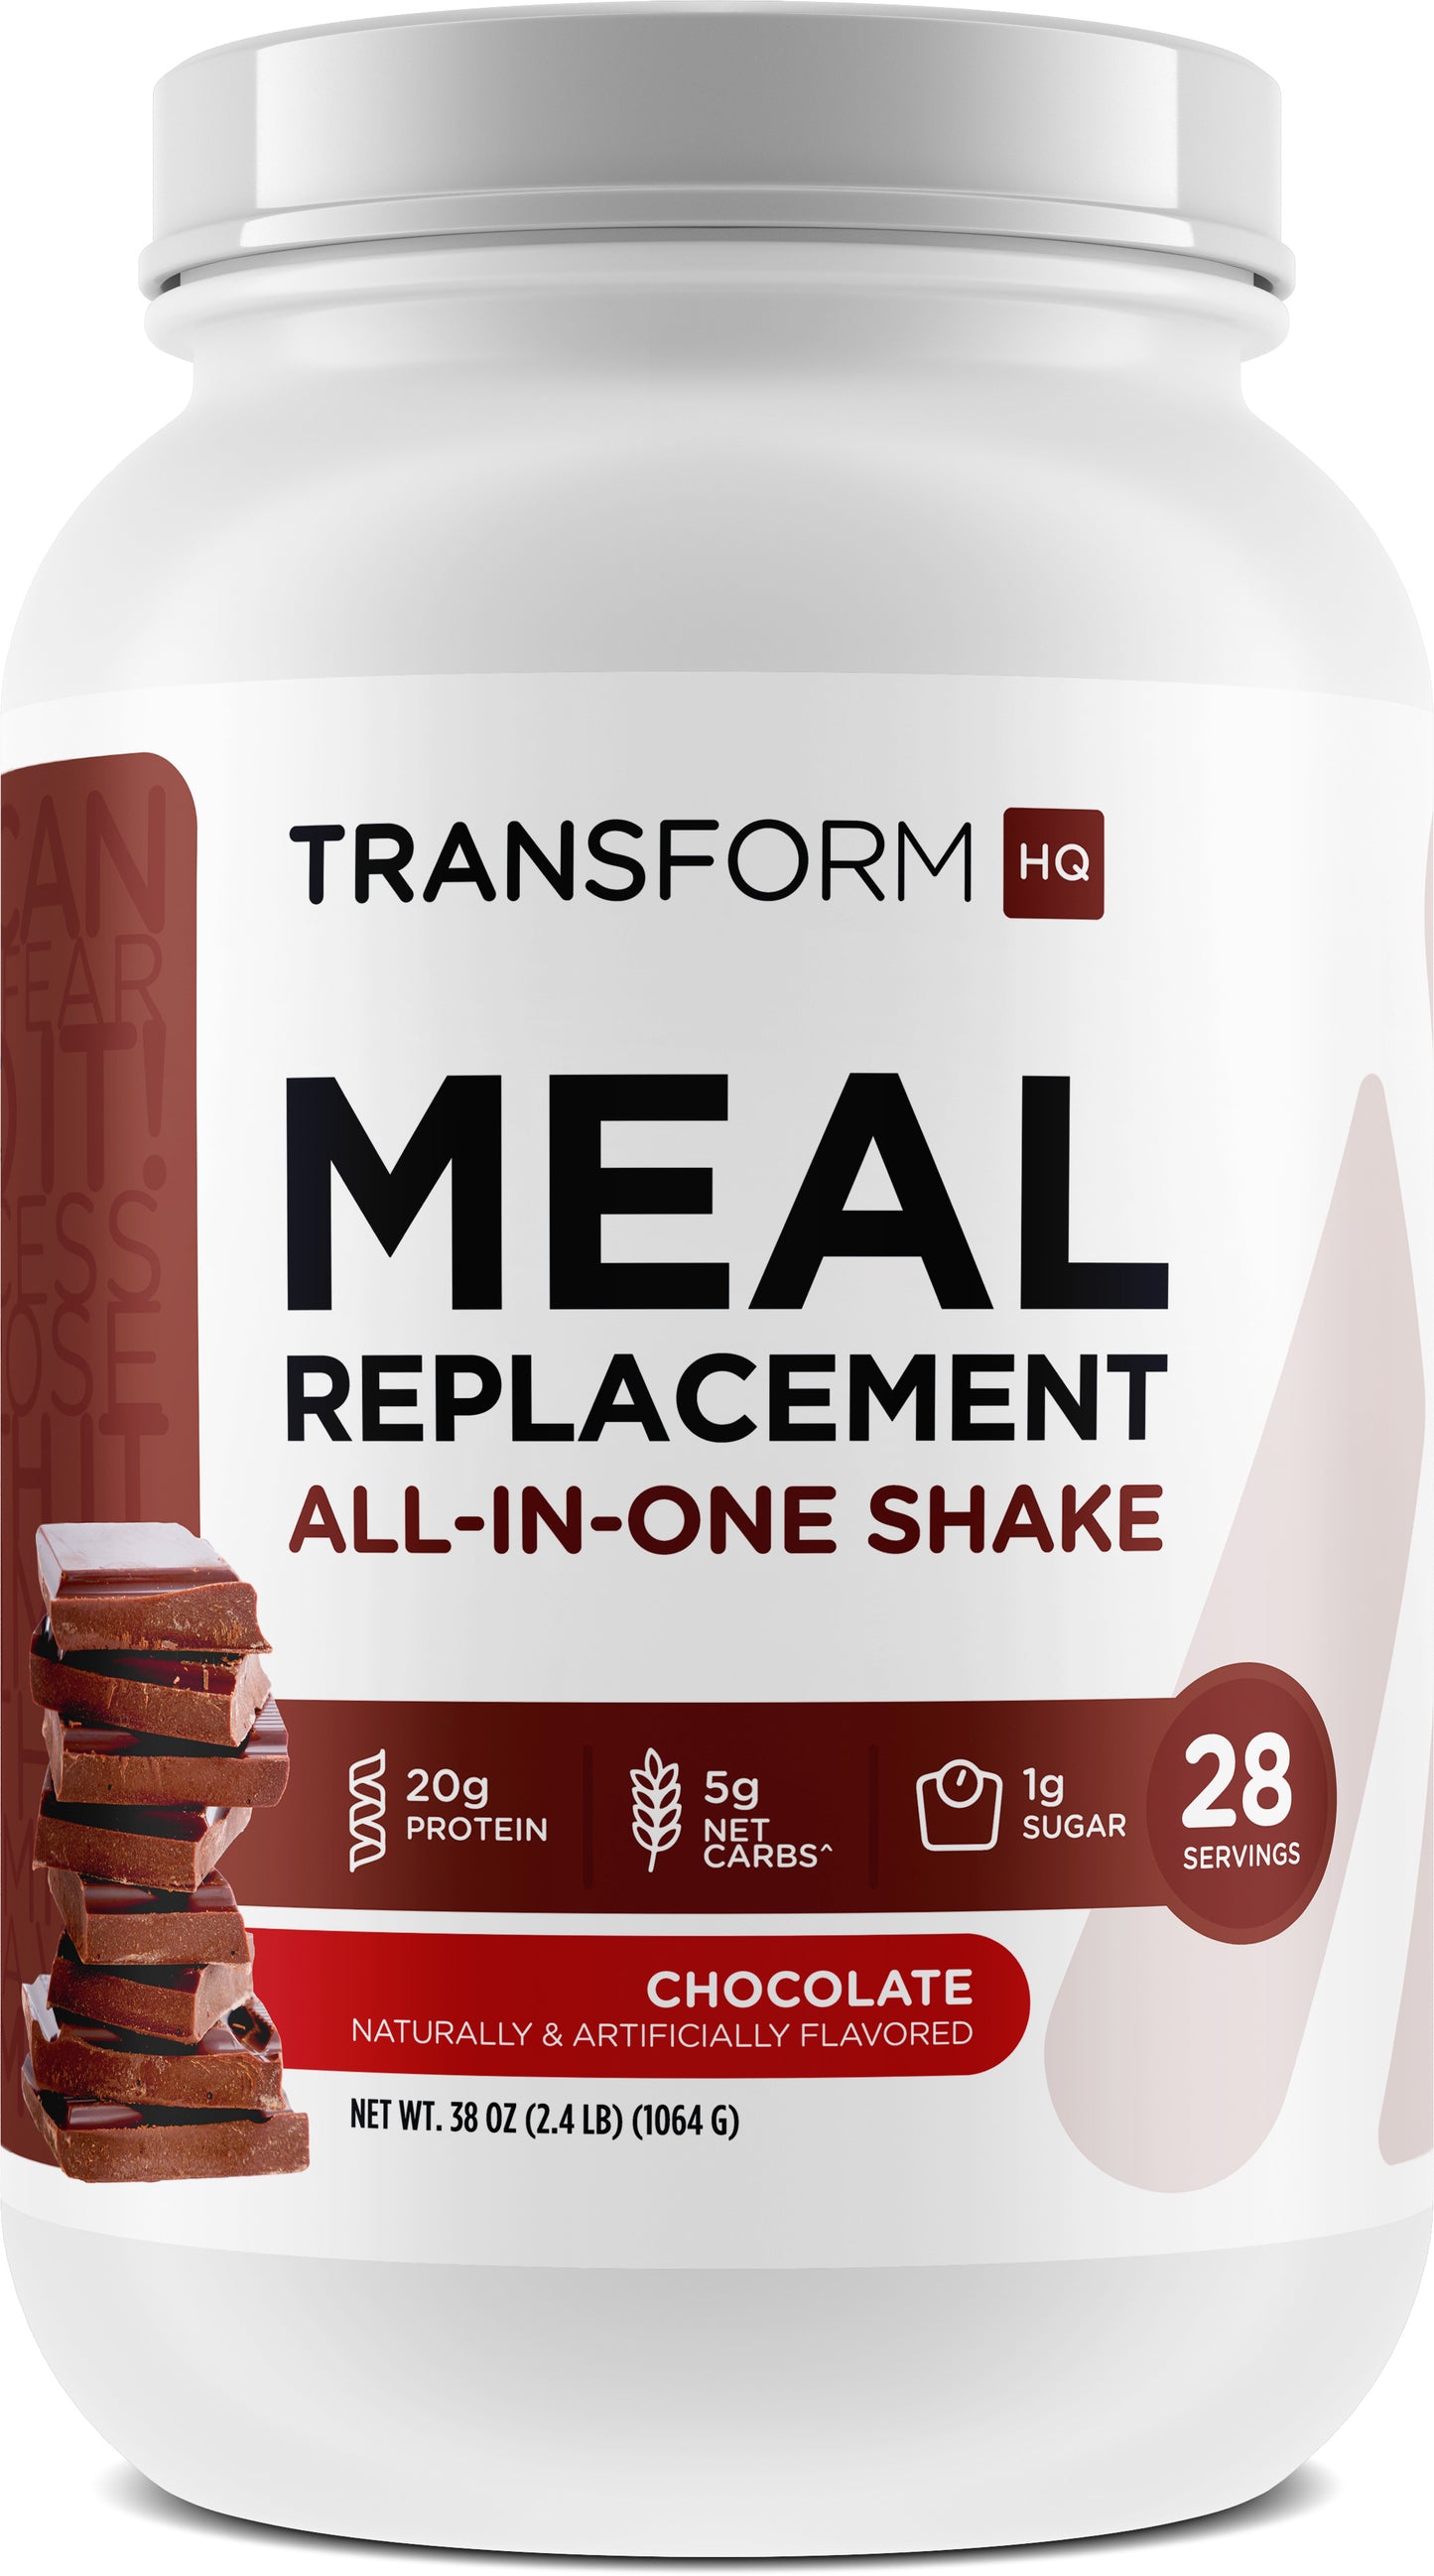 TransformHQ Meal Replacement Shakes